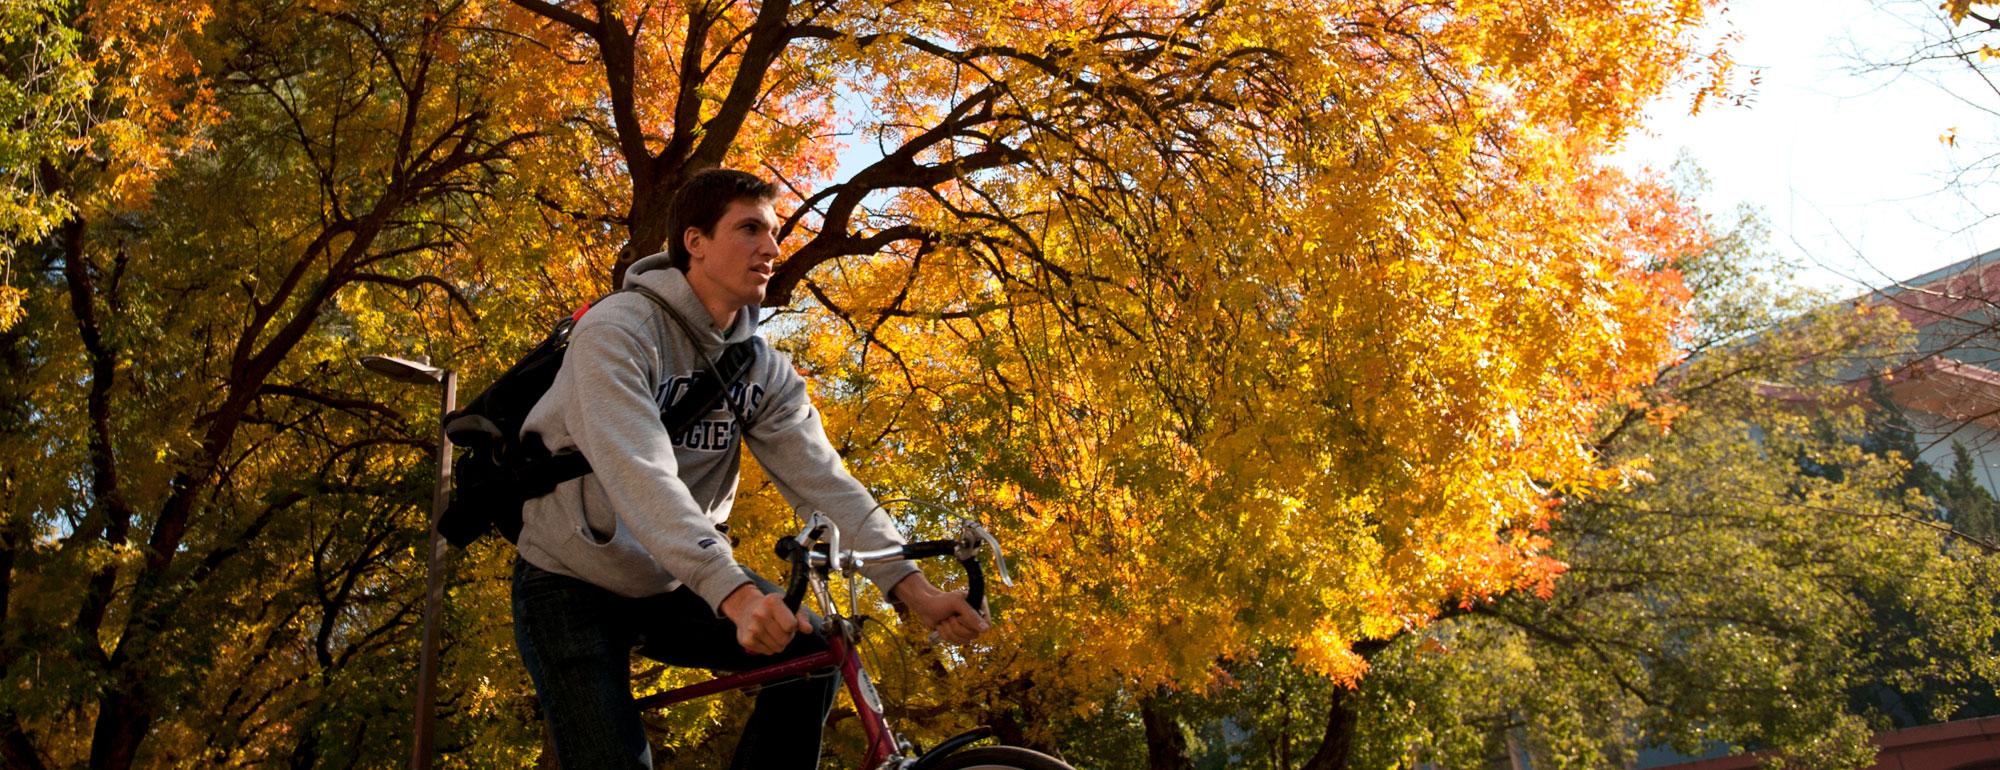 A male student rides his bicycle under the Fall foliage on the TV campus